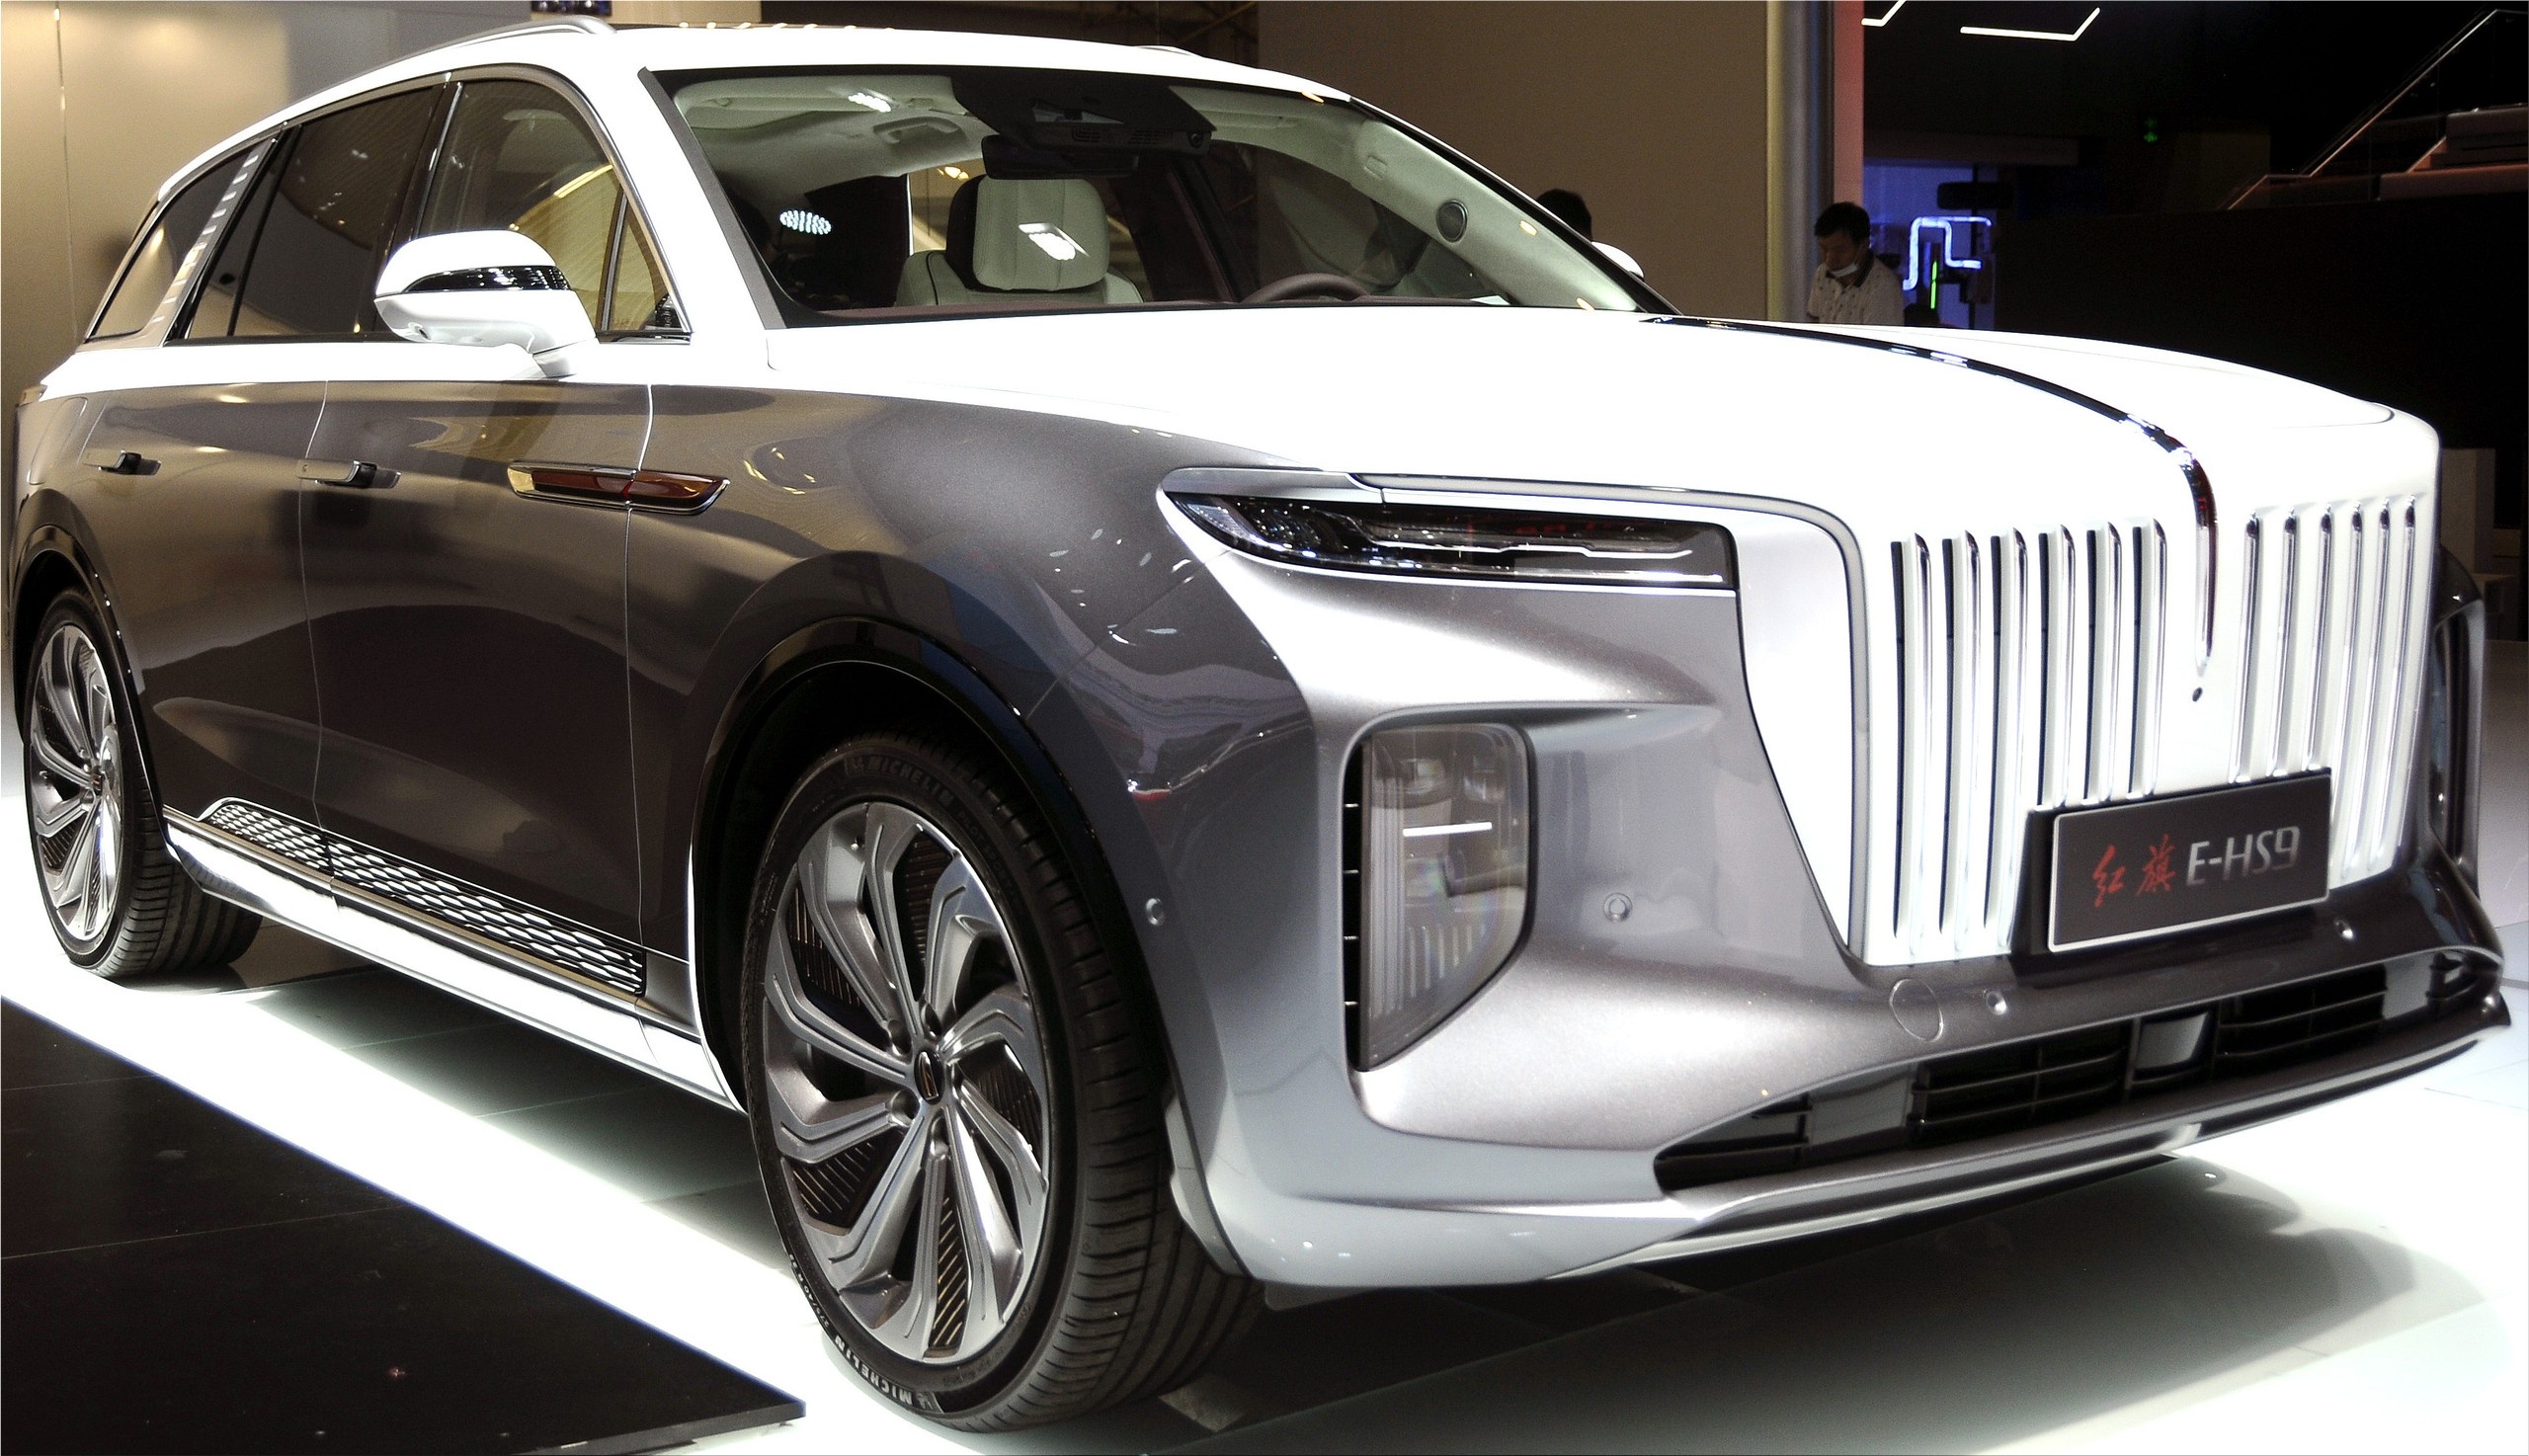 Hongqi electric SUV, Cutting-edge technology, Electrifying performance, Sustainable mobility, 2560x1480 HD Desktop